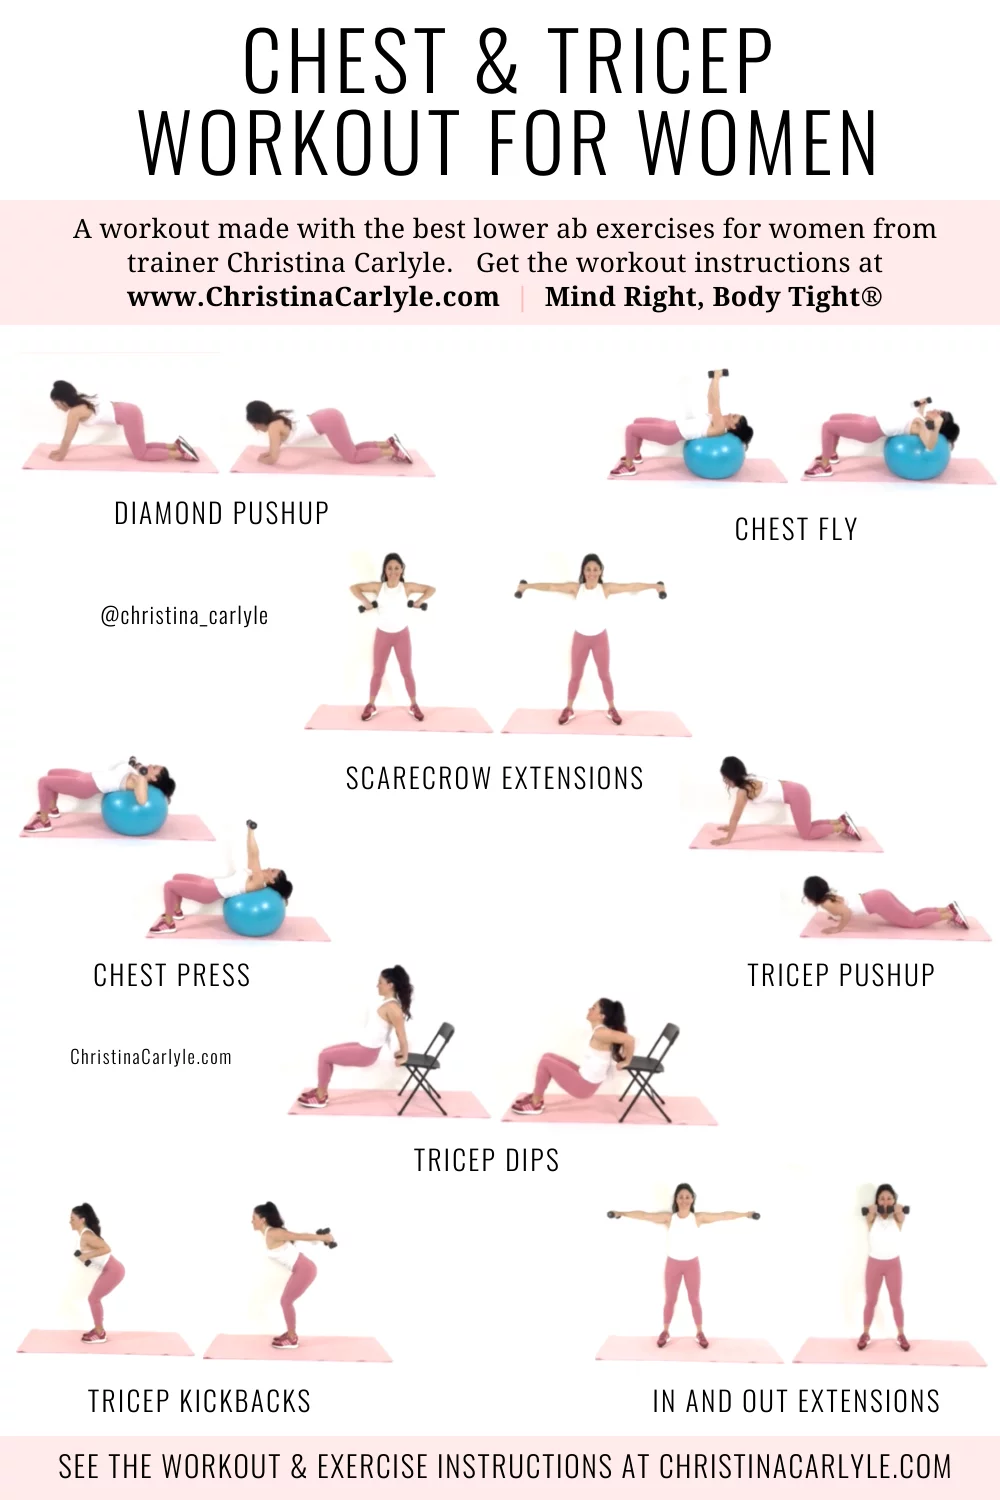 Chest Workouts For Women